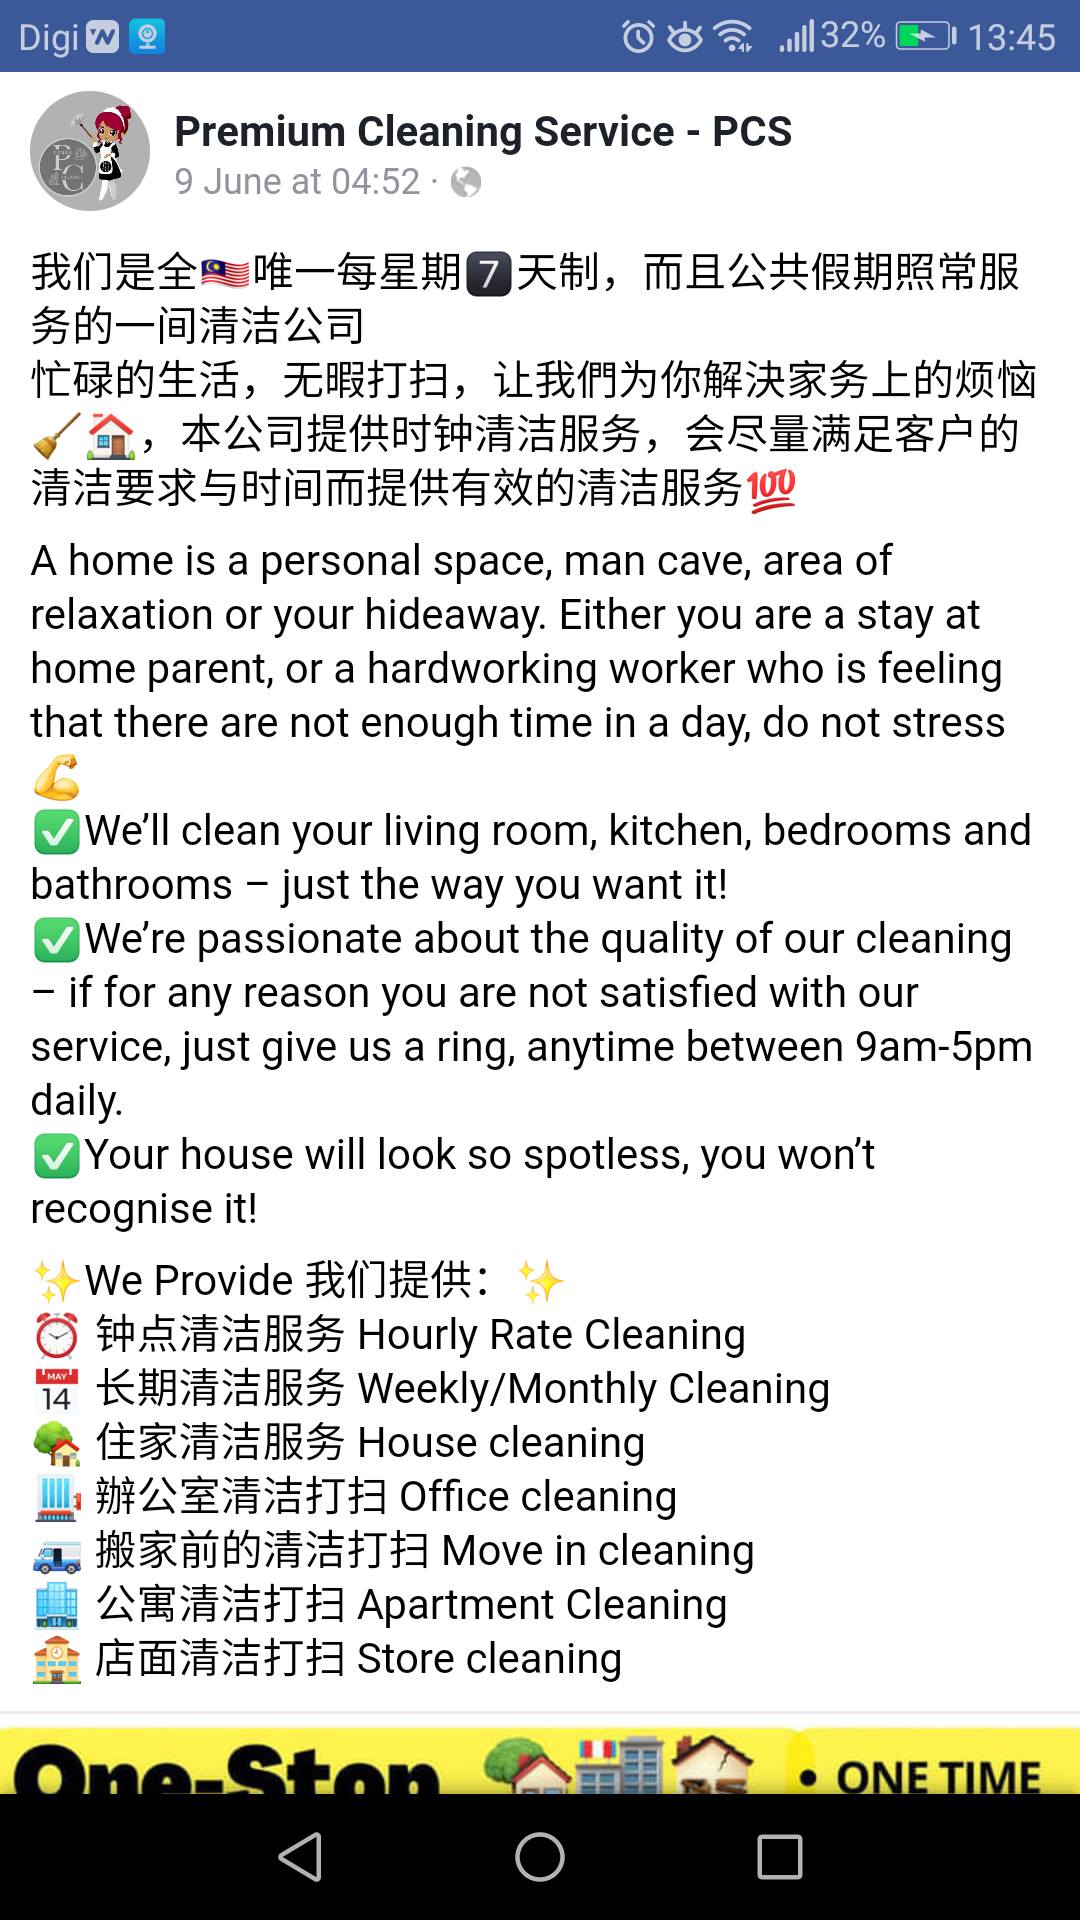 Facebook user Leng shares how a 'cleaning company' on Facebook scammed her of her money in minutes. Image credit: HL Leng